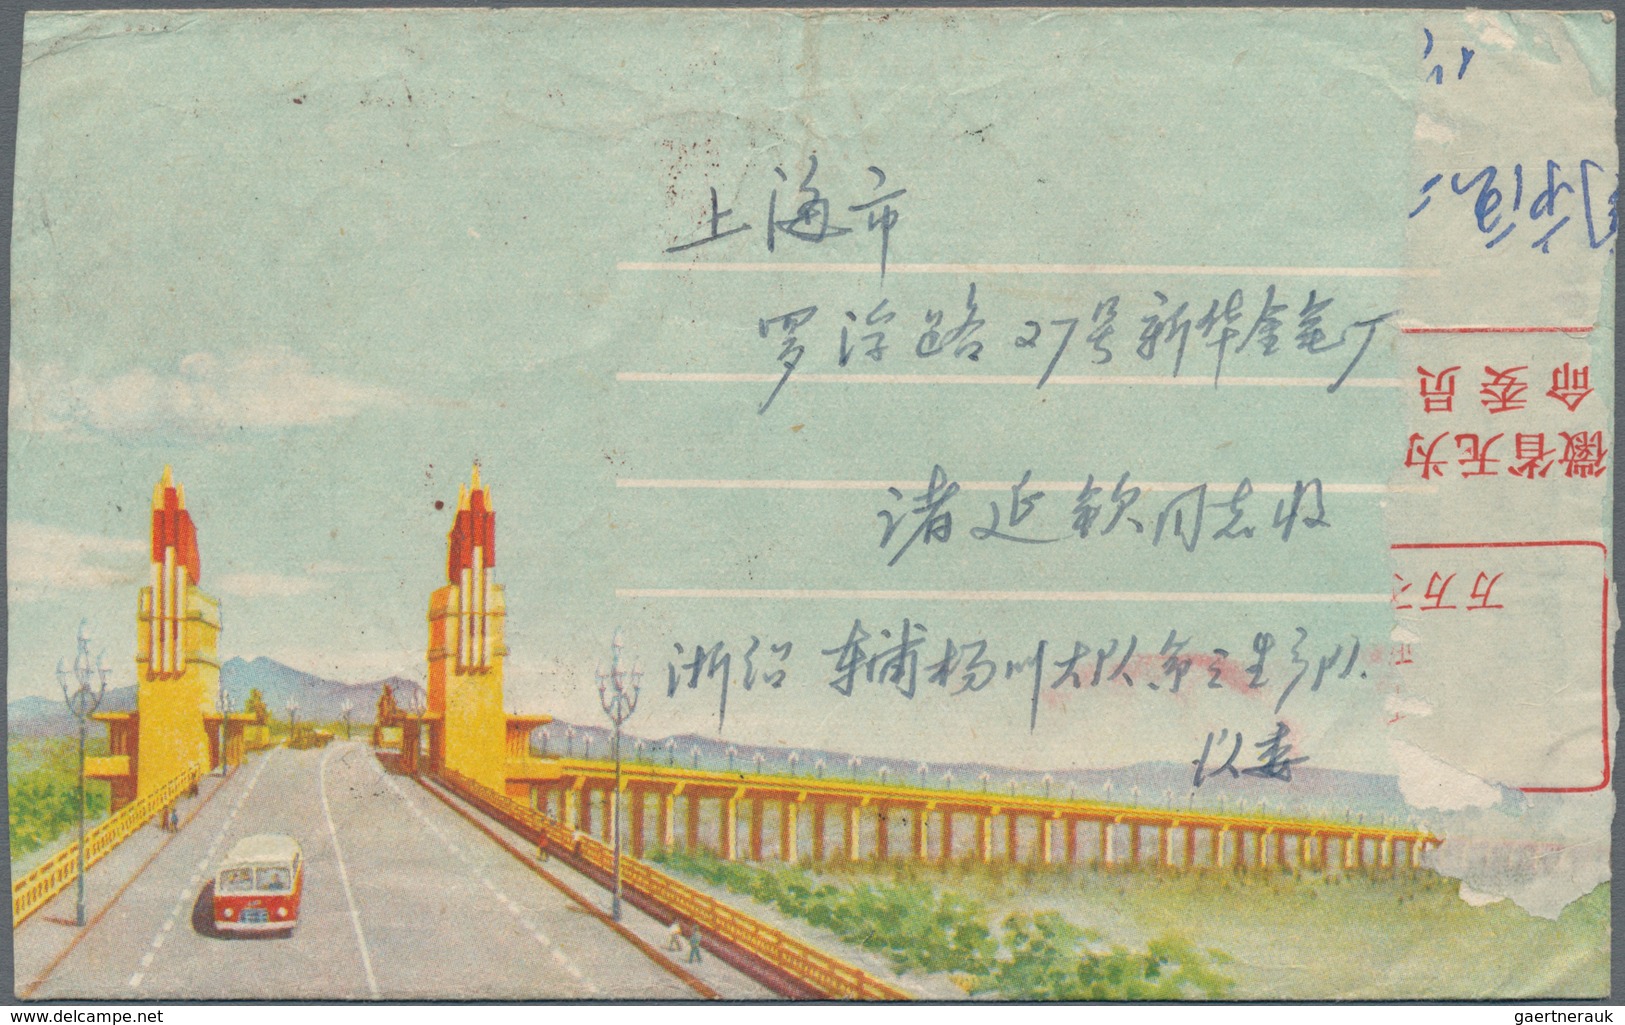 China - Volksrepublik: 1955/71 (ca.), approx. 40 commercial covers of the early PRC era, mostly bear